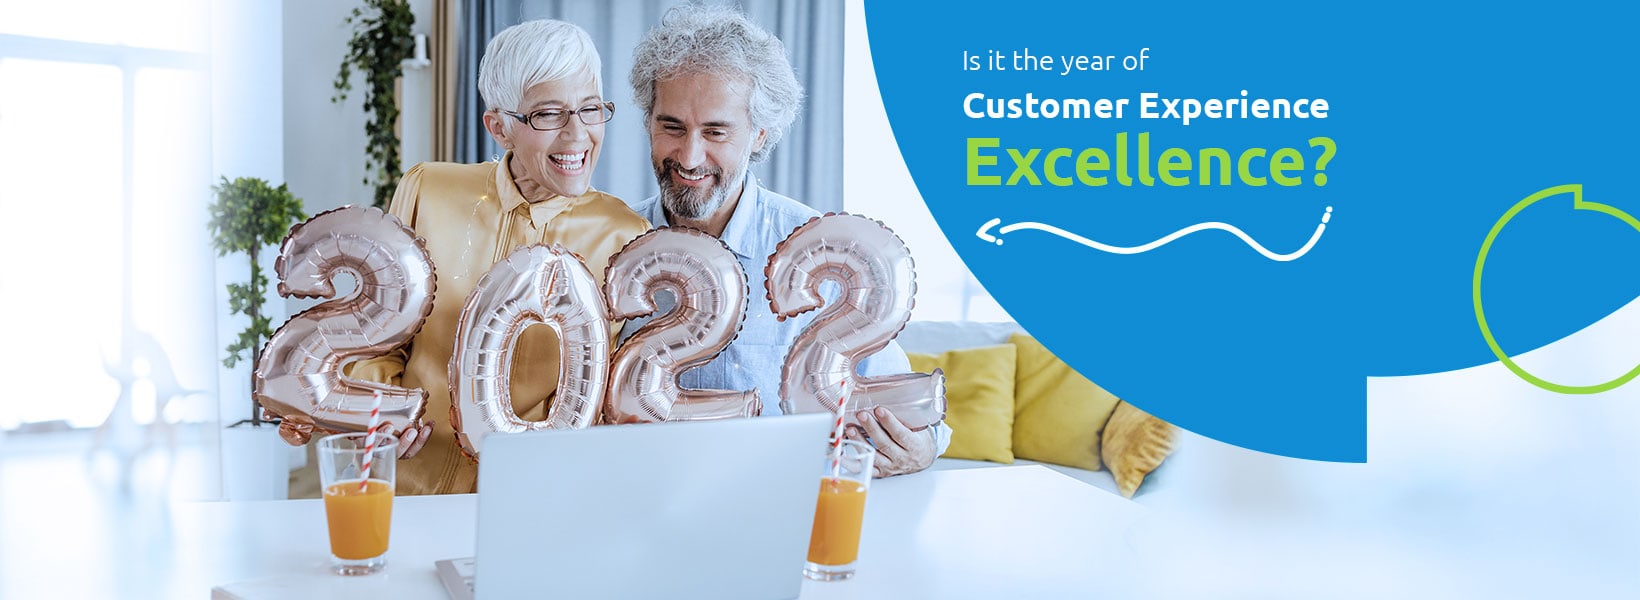 2022 is the Year of Digital Customer Experience Excellence – Here’s Why